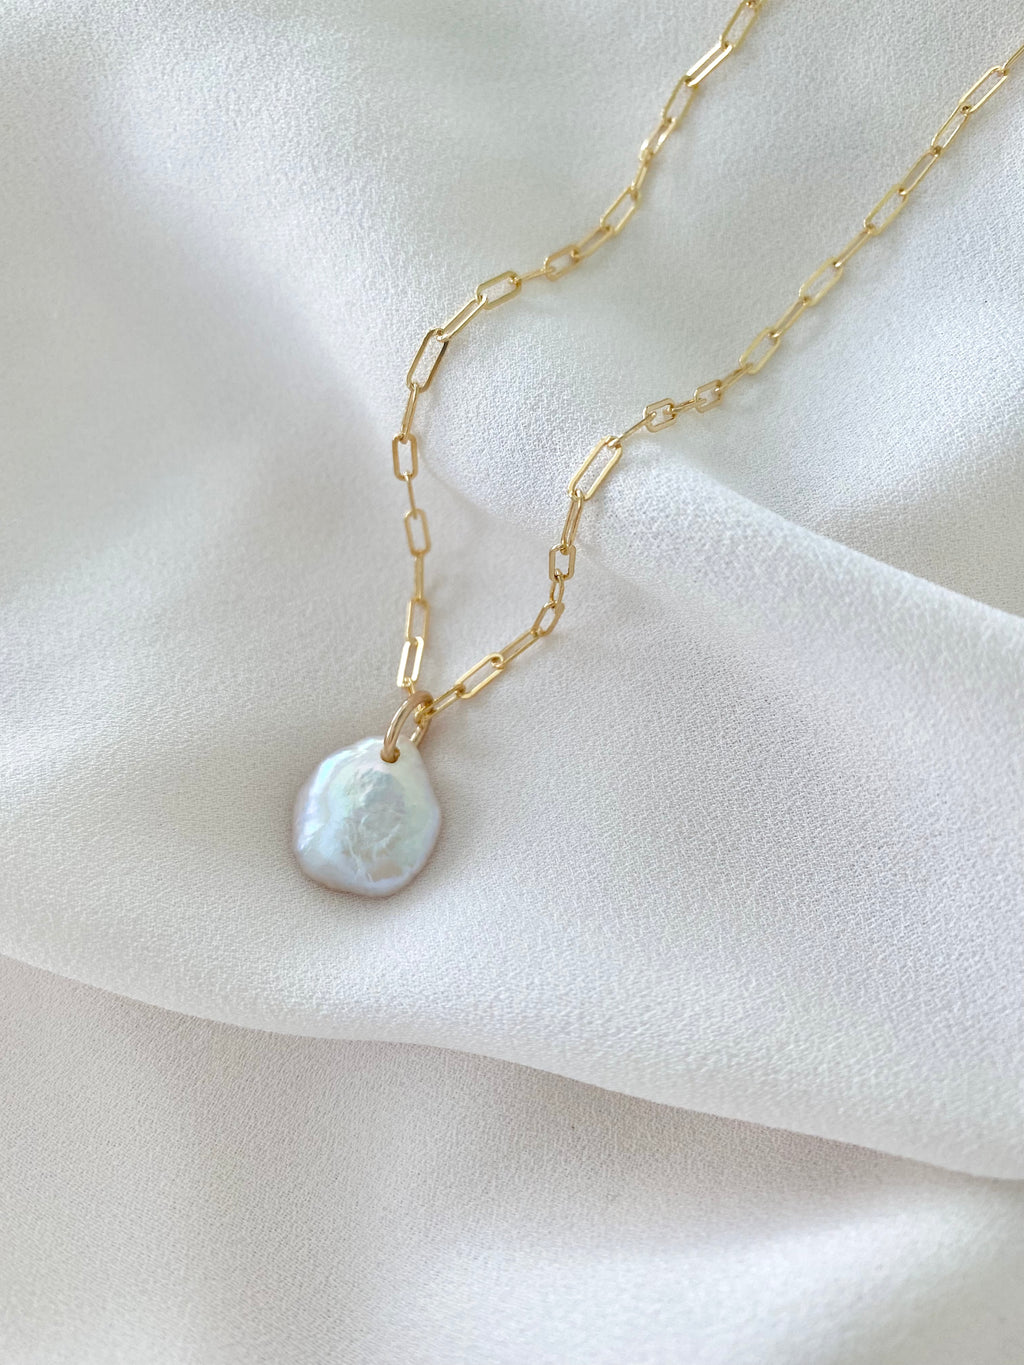 Dainty Freshwater Pearl Pendant Necklace - Gold Filled - June Birthstone - Modern Pearl Necklace